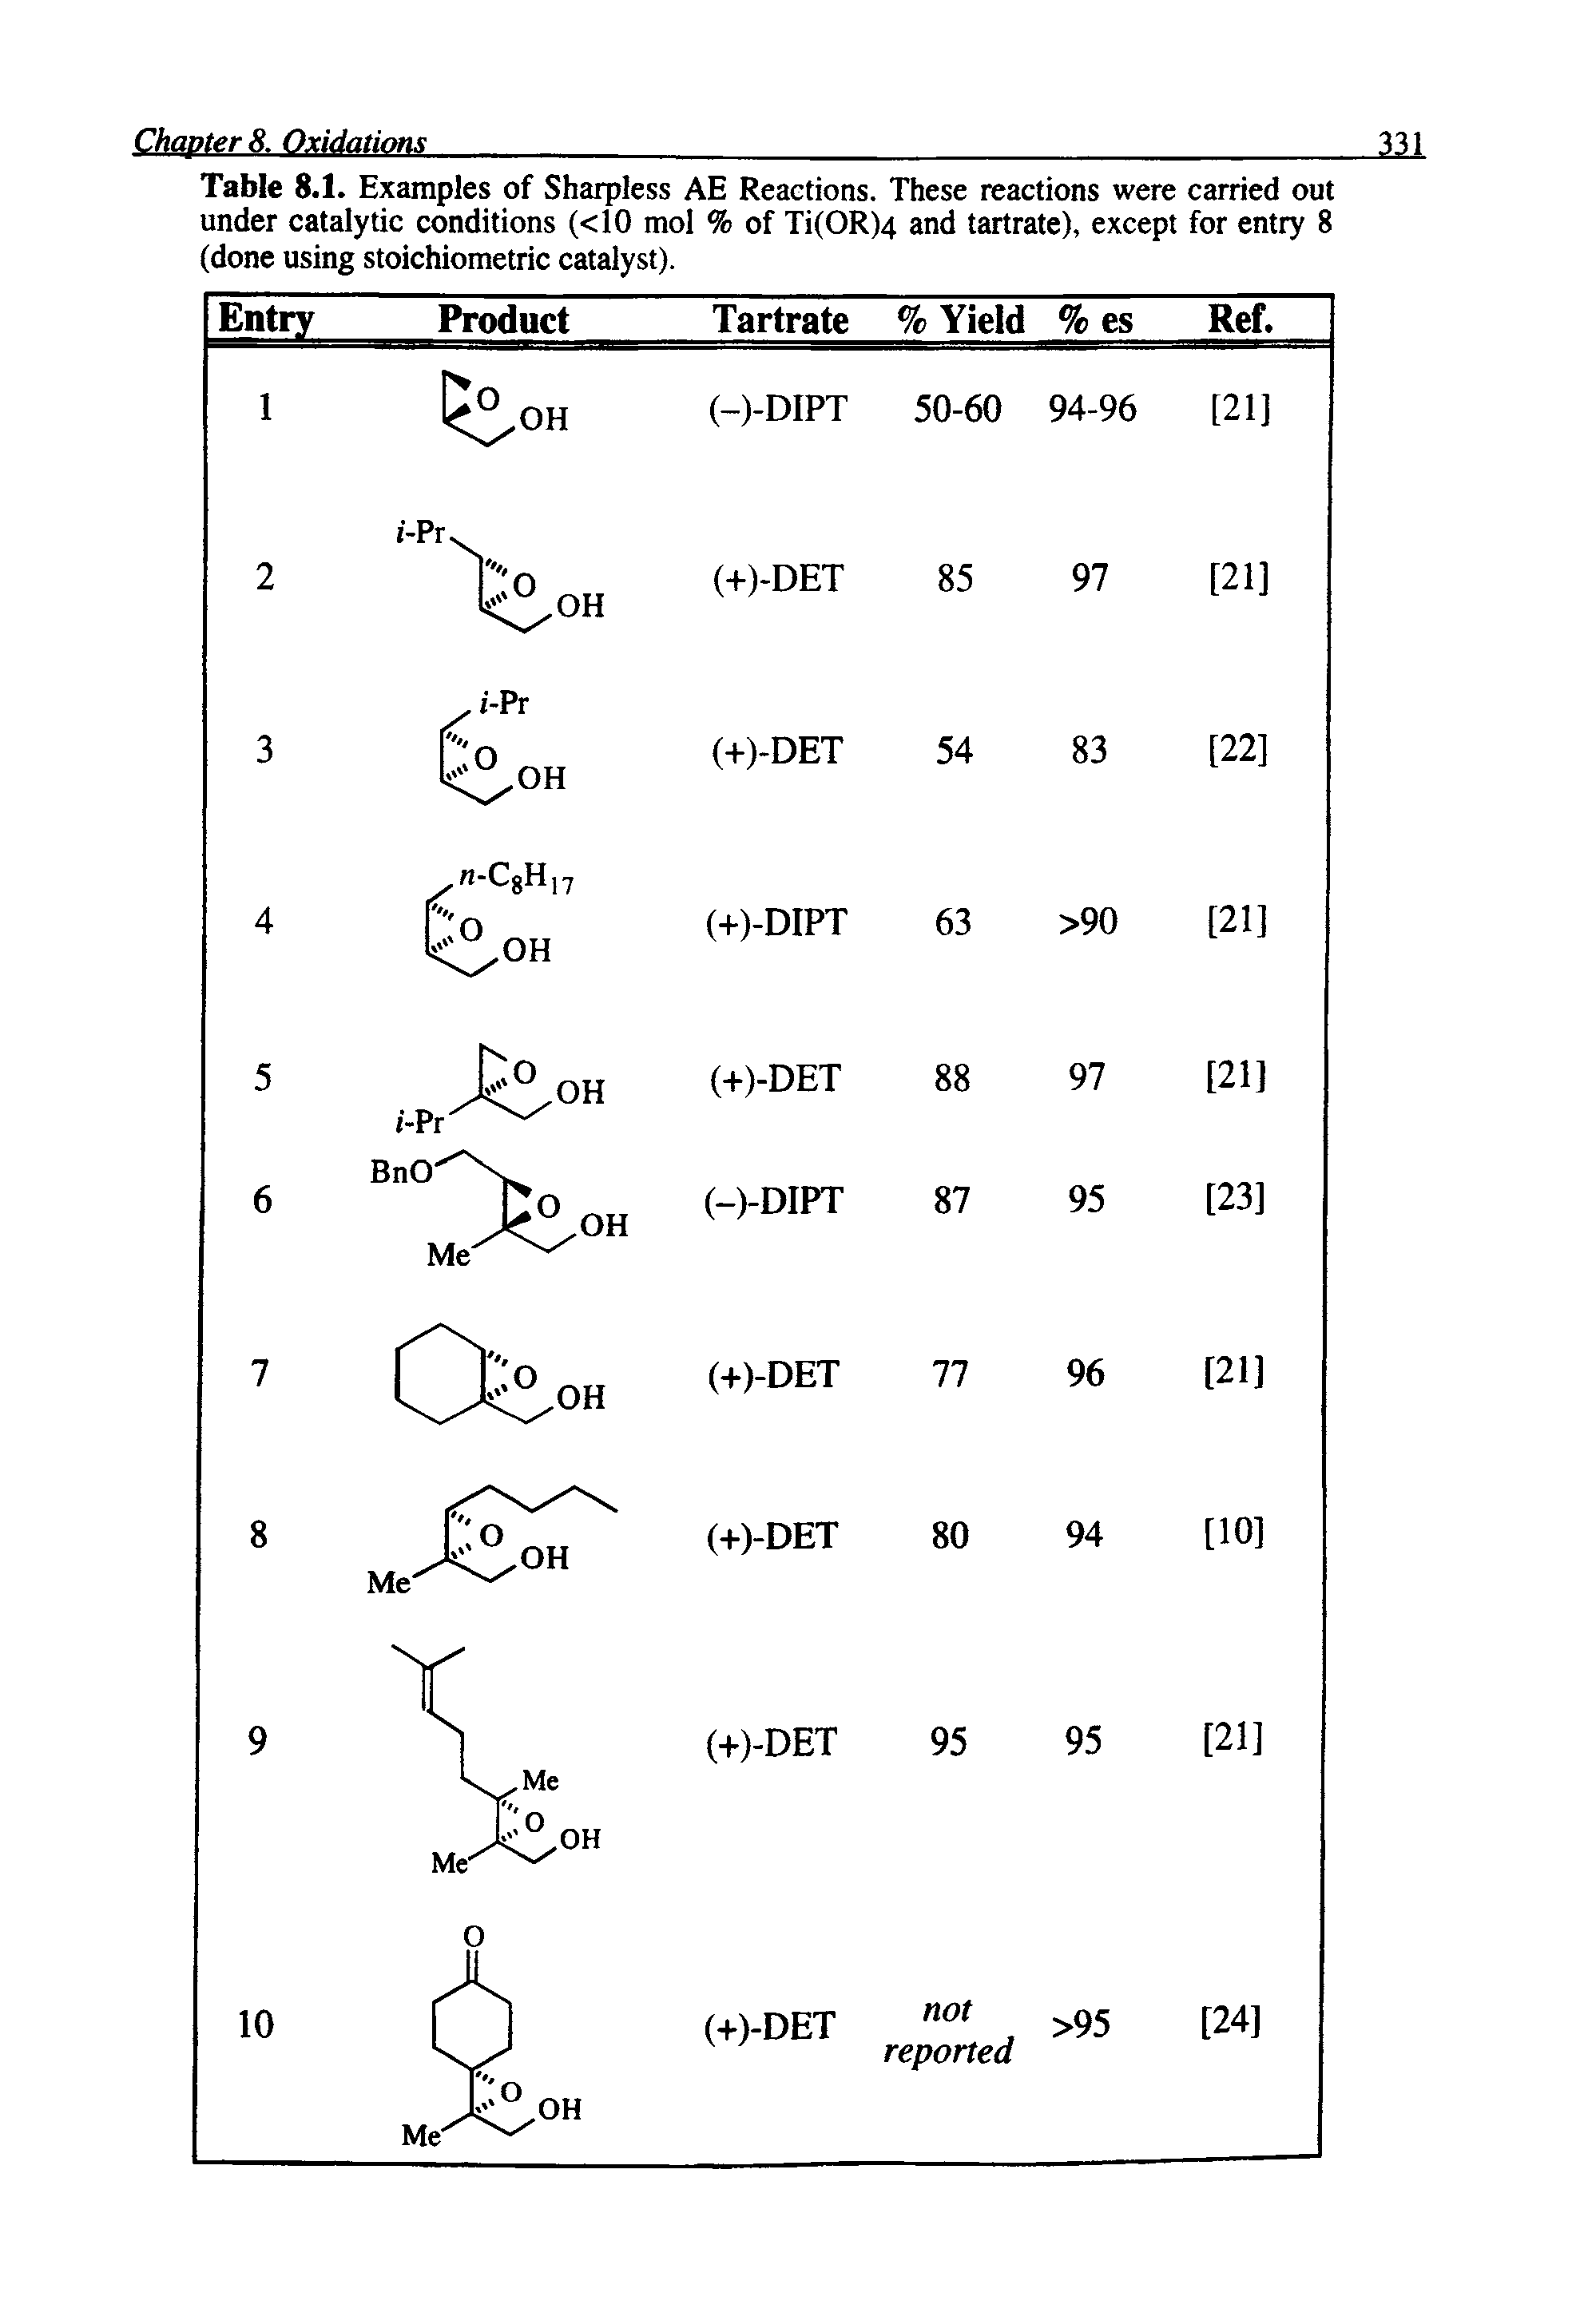 Table 8.1. Examples of Sharpless AE Reactions. These reactions were carried out under catalytic conditions (<10 mol % of Ti(OR)4 and tartrate), except for entry 8 (done using stoichiometric catalyst).